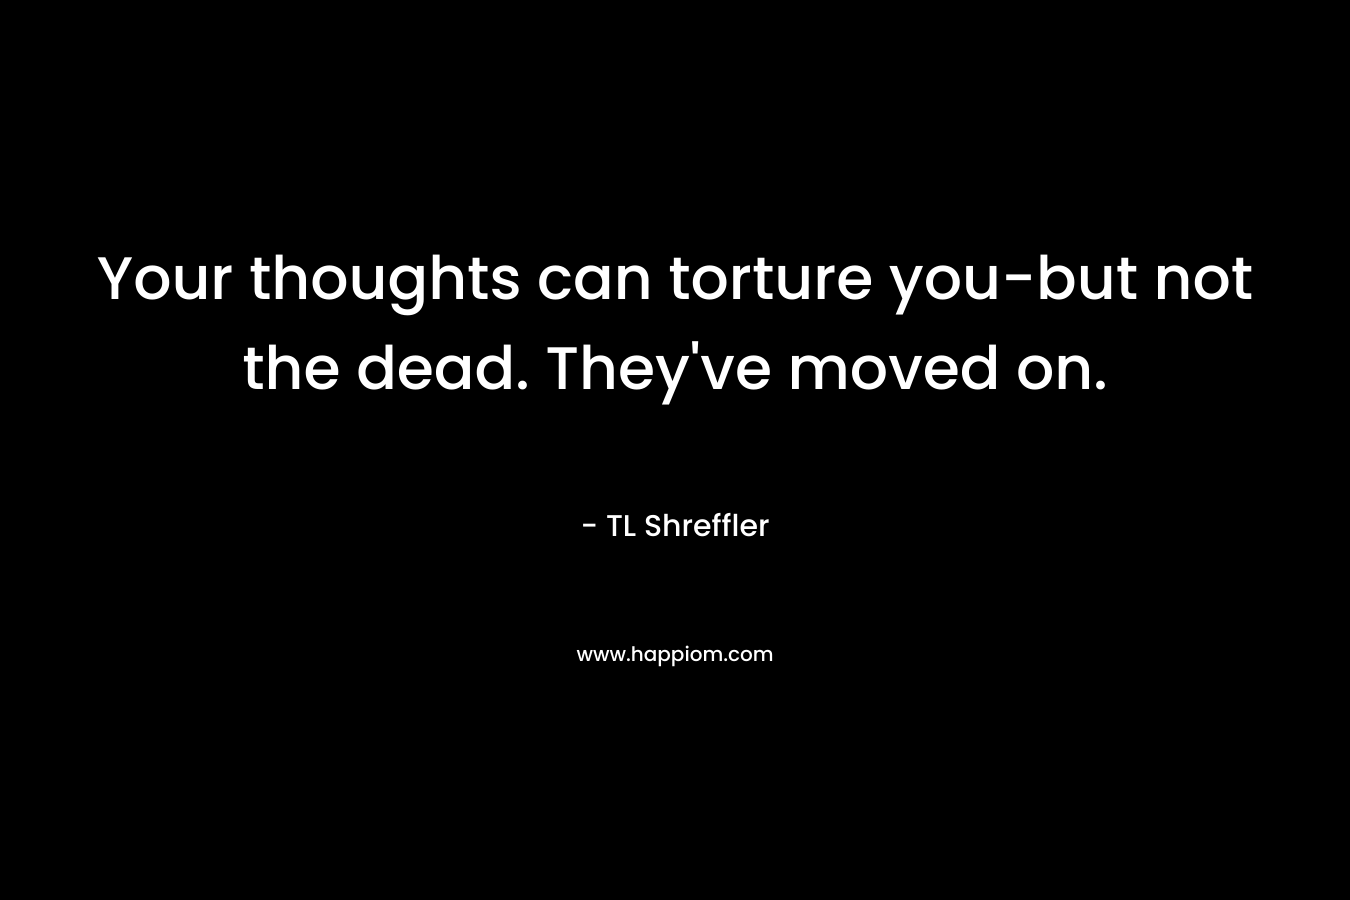 Your thoughts can torture you-but not the dead. They've moved on.